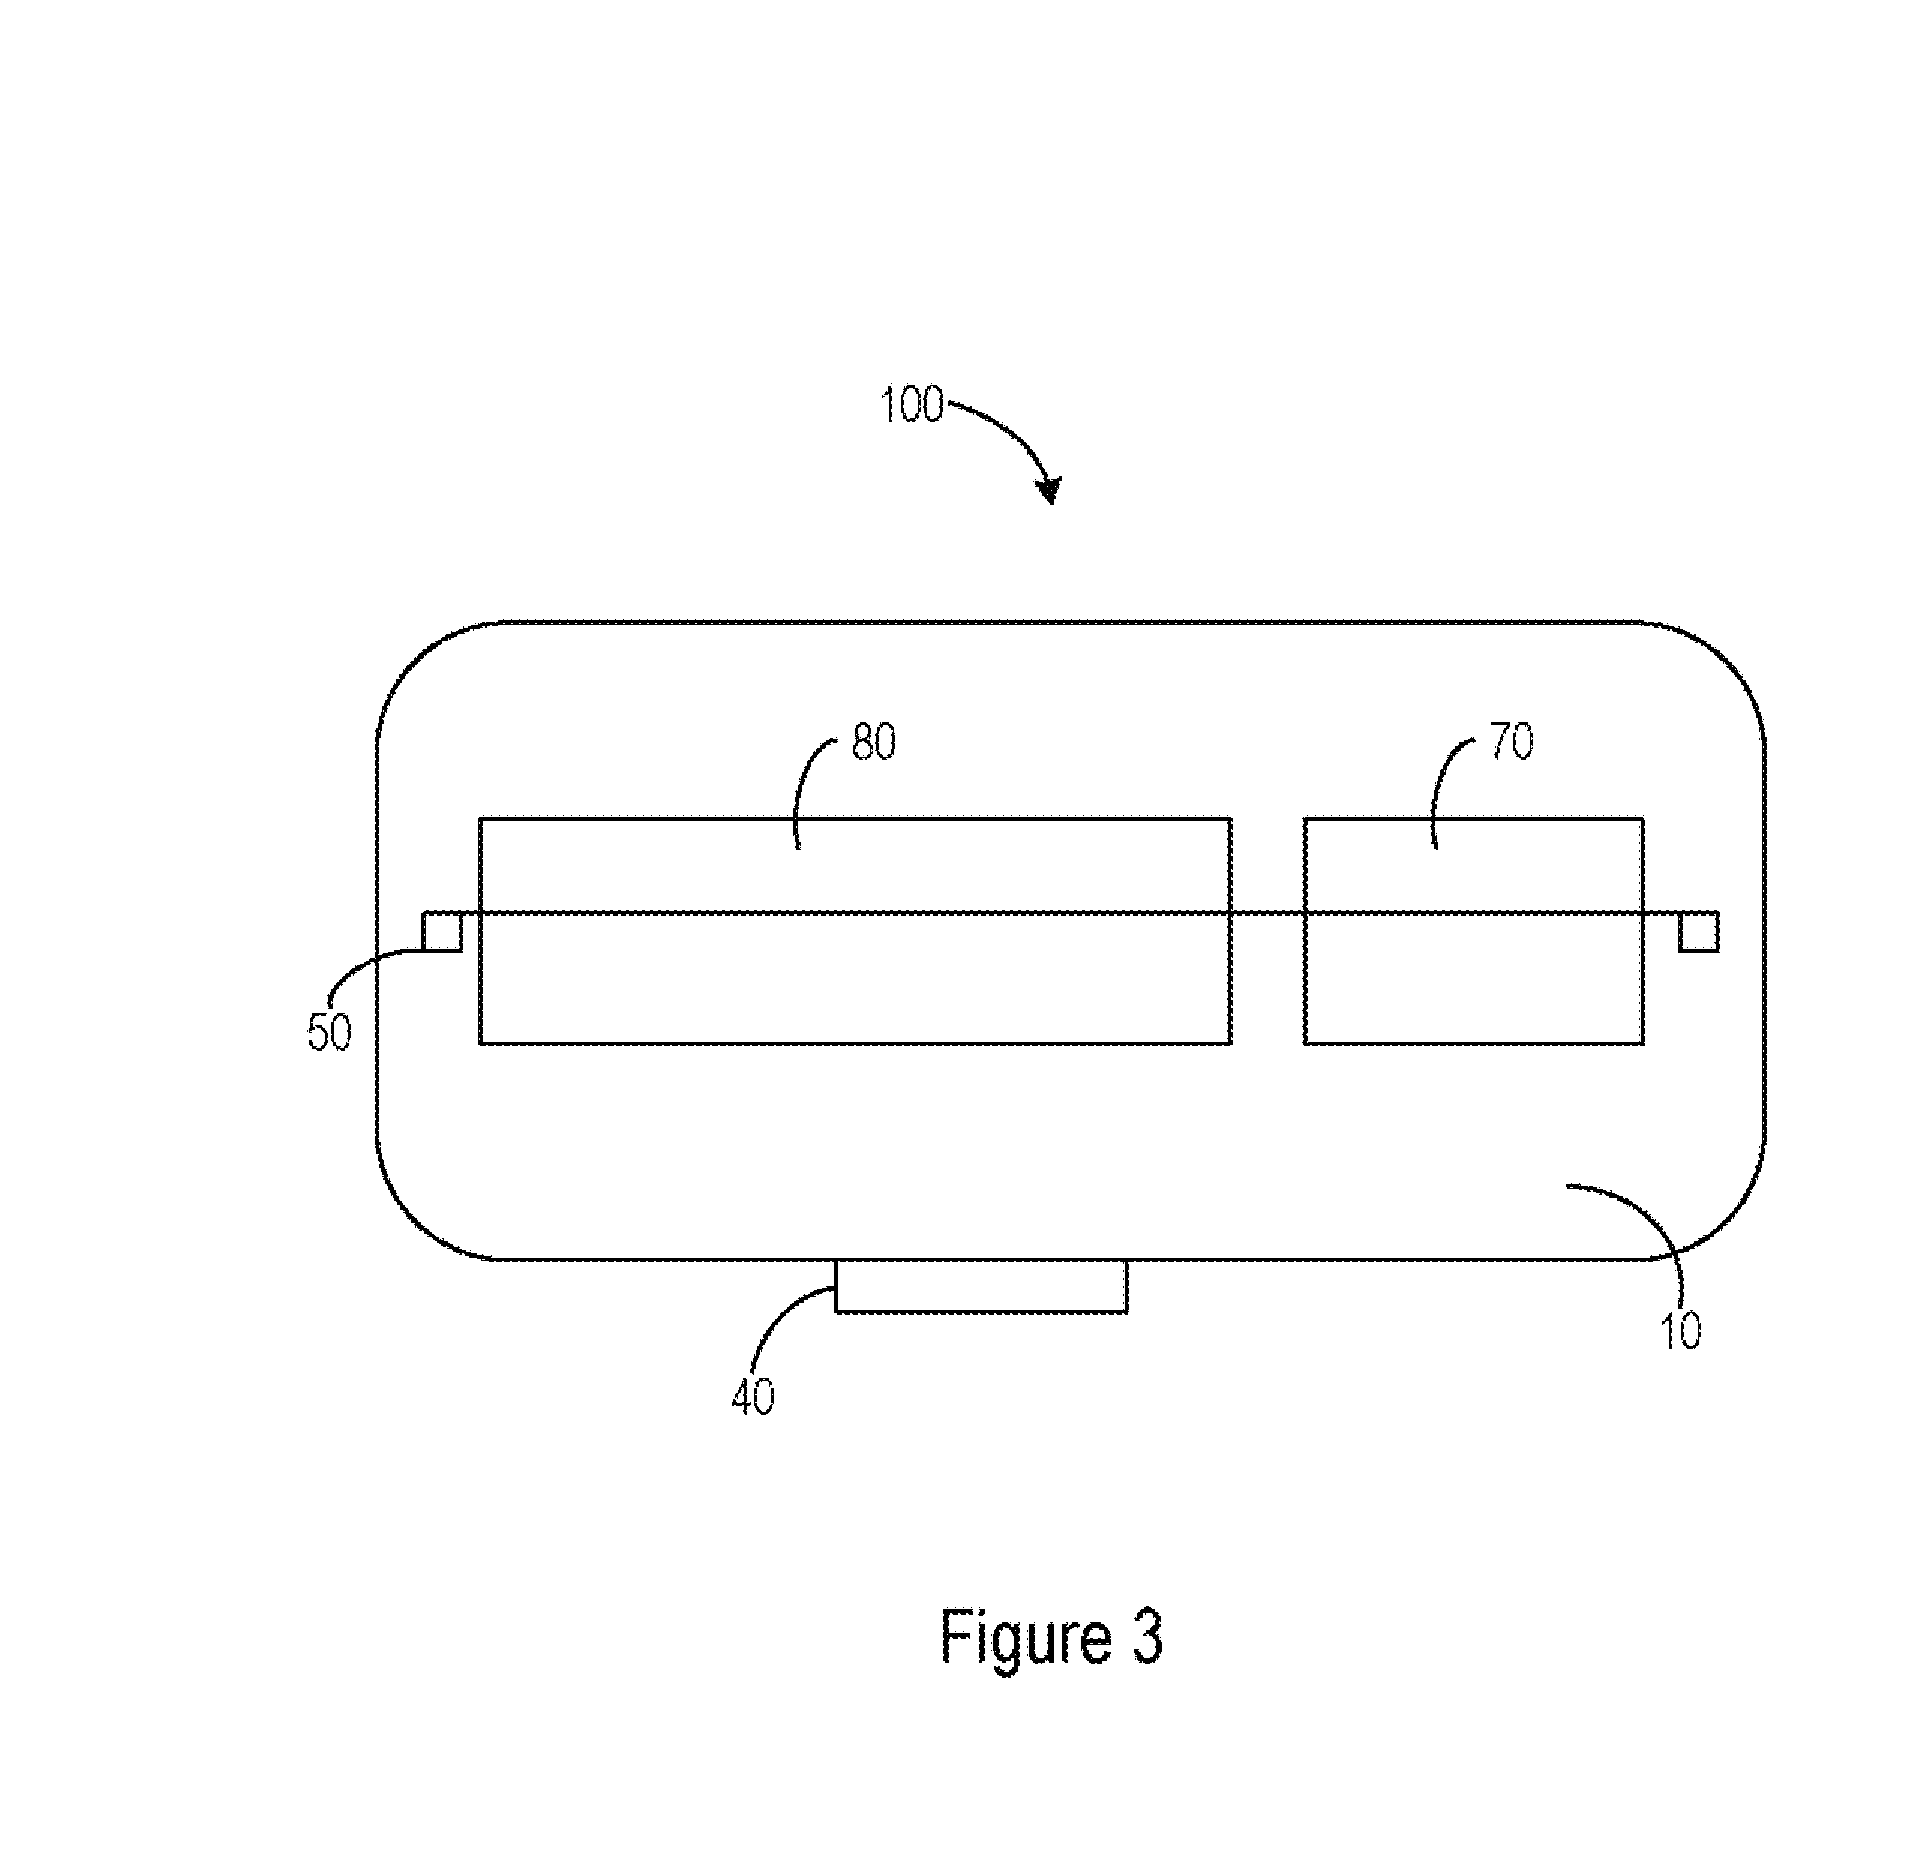 Multi-directional, multi-functional, wearable safety lighting apparatus